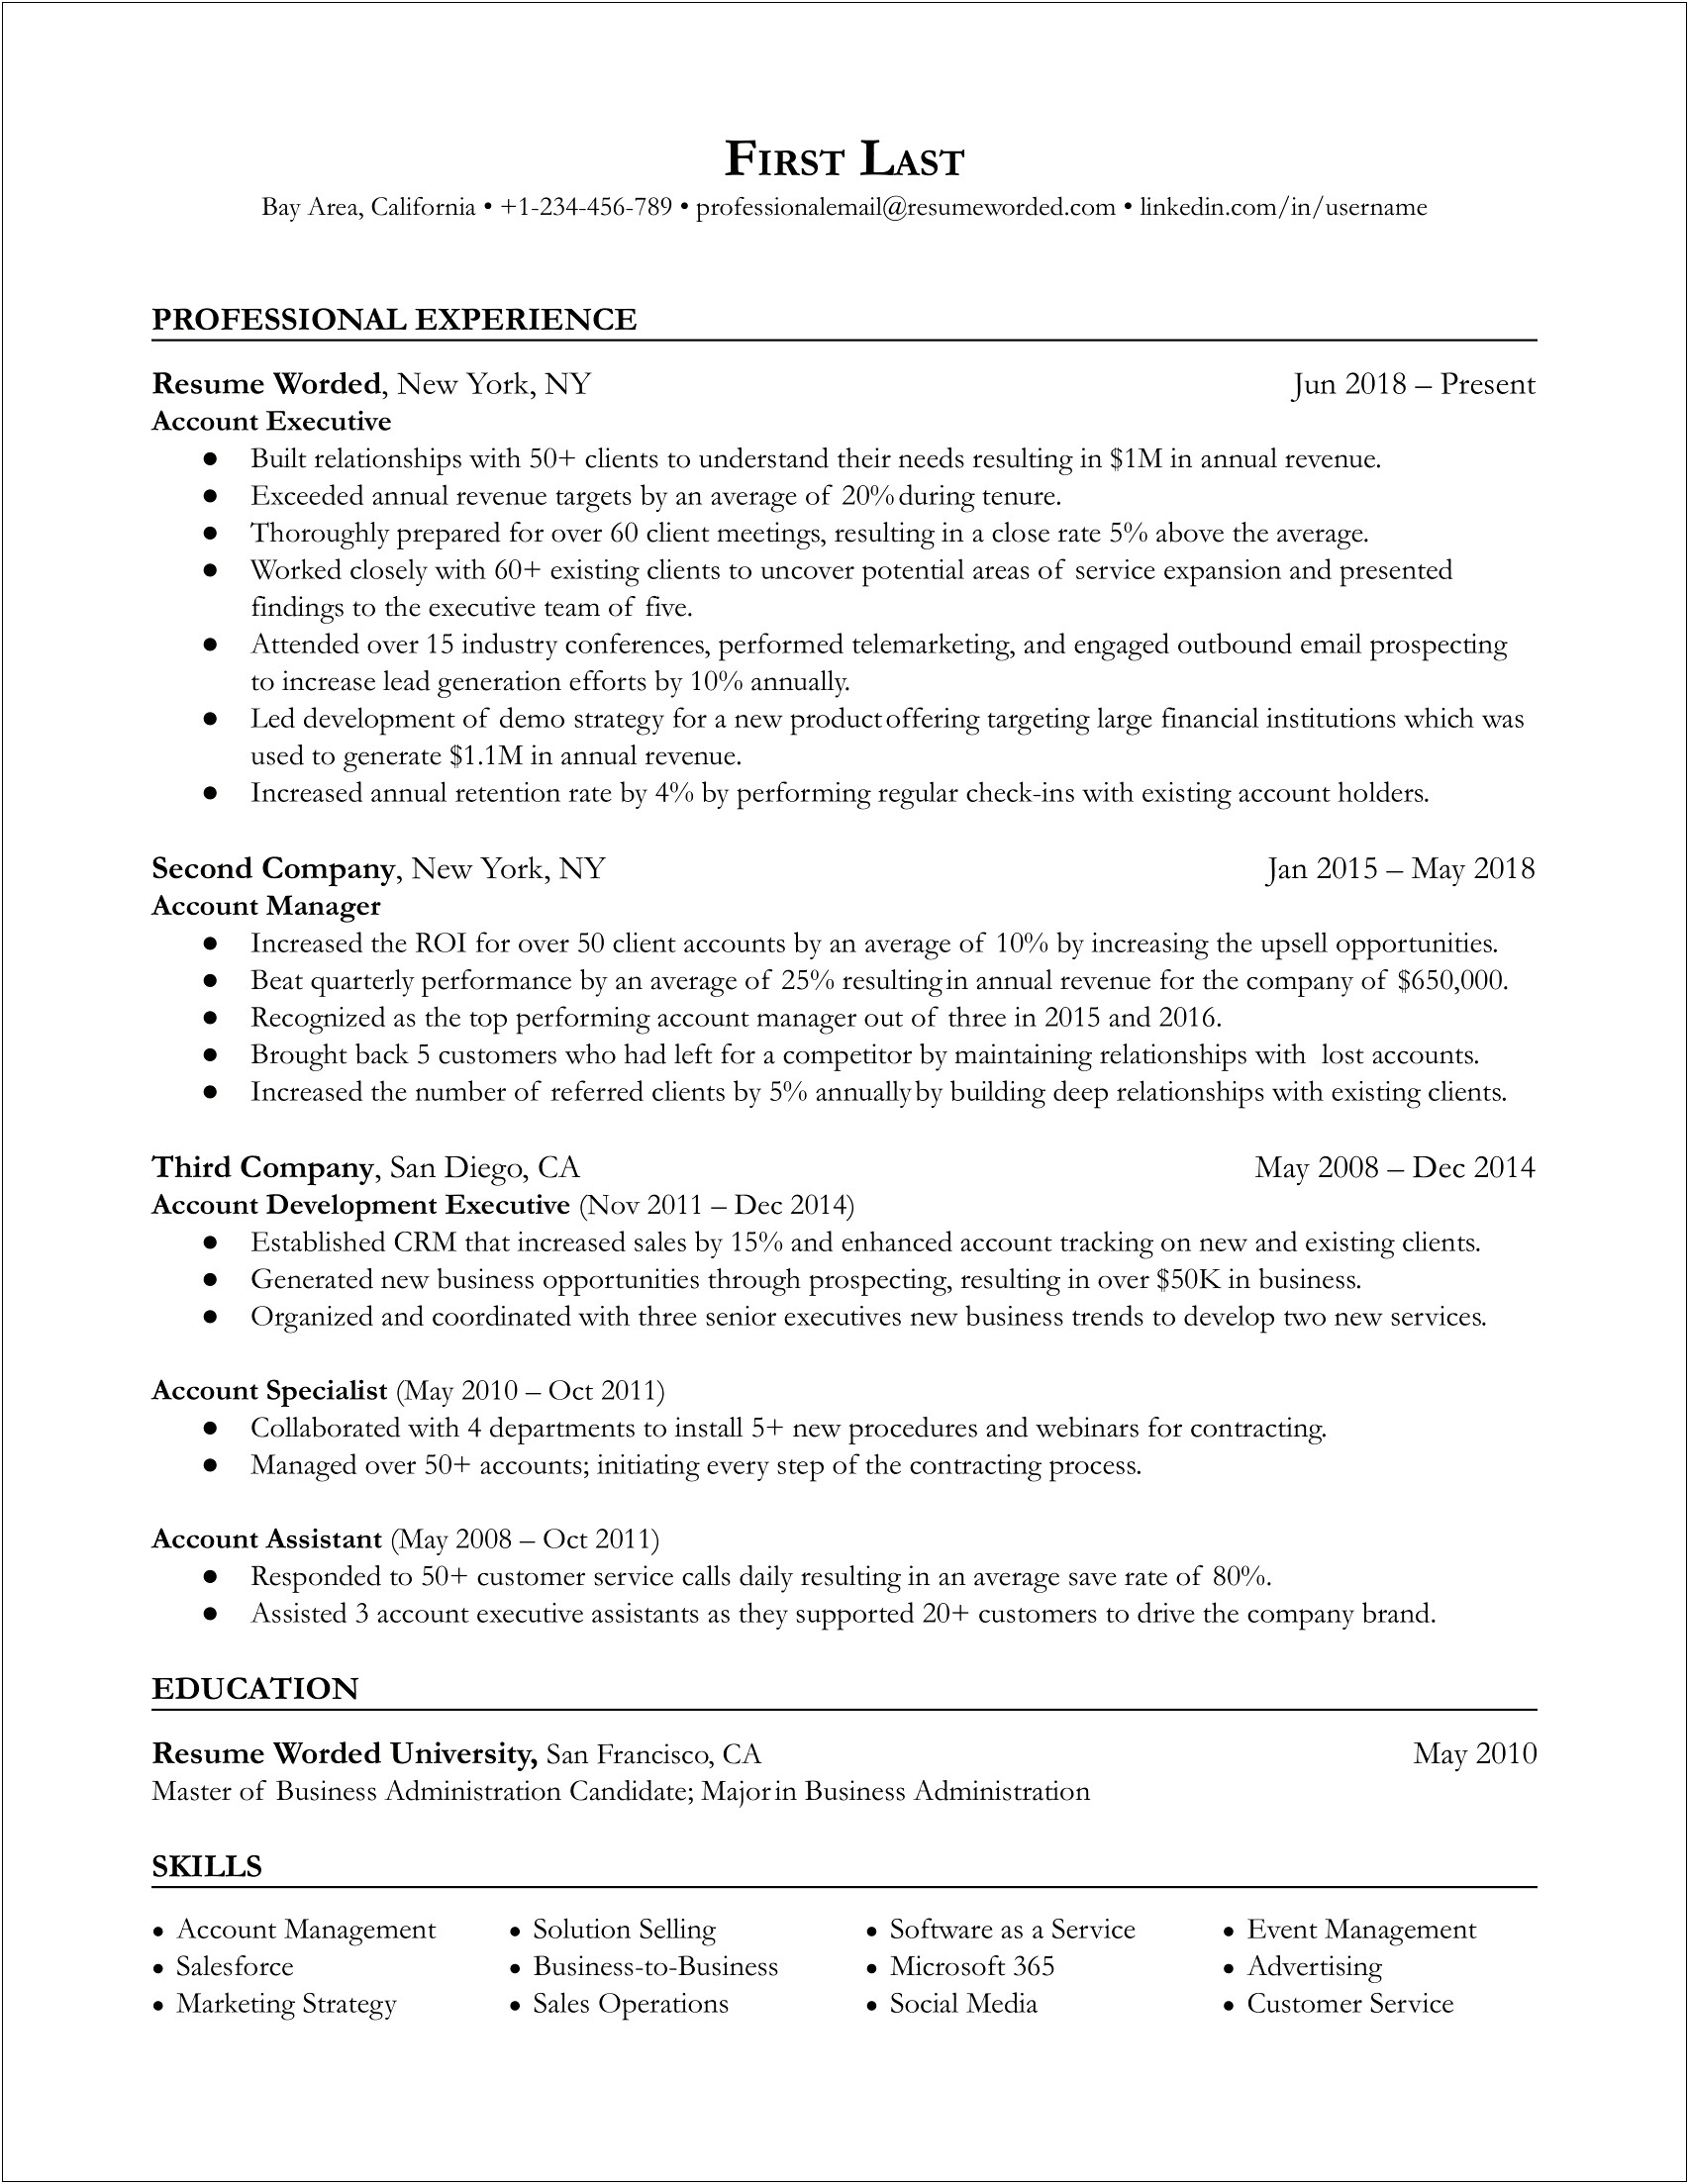 Purchase Executive Resume Format In Word Free Download